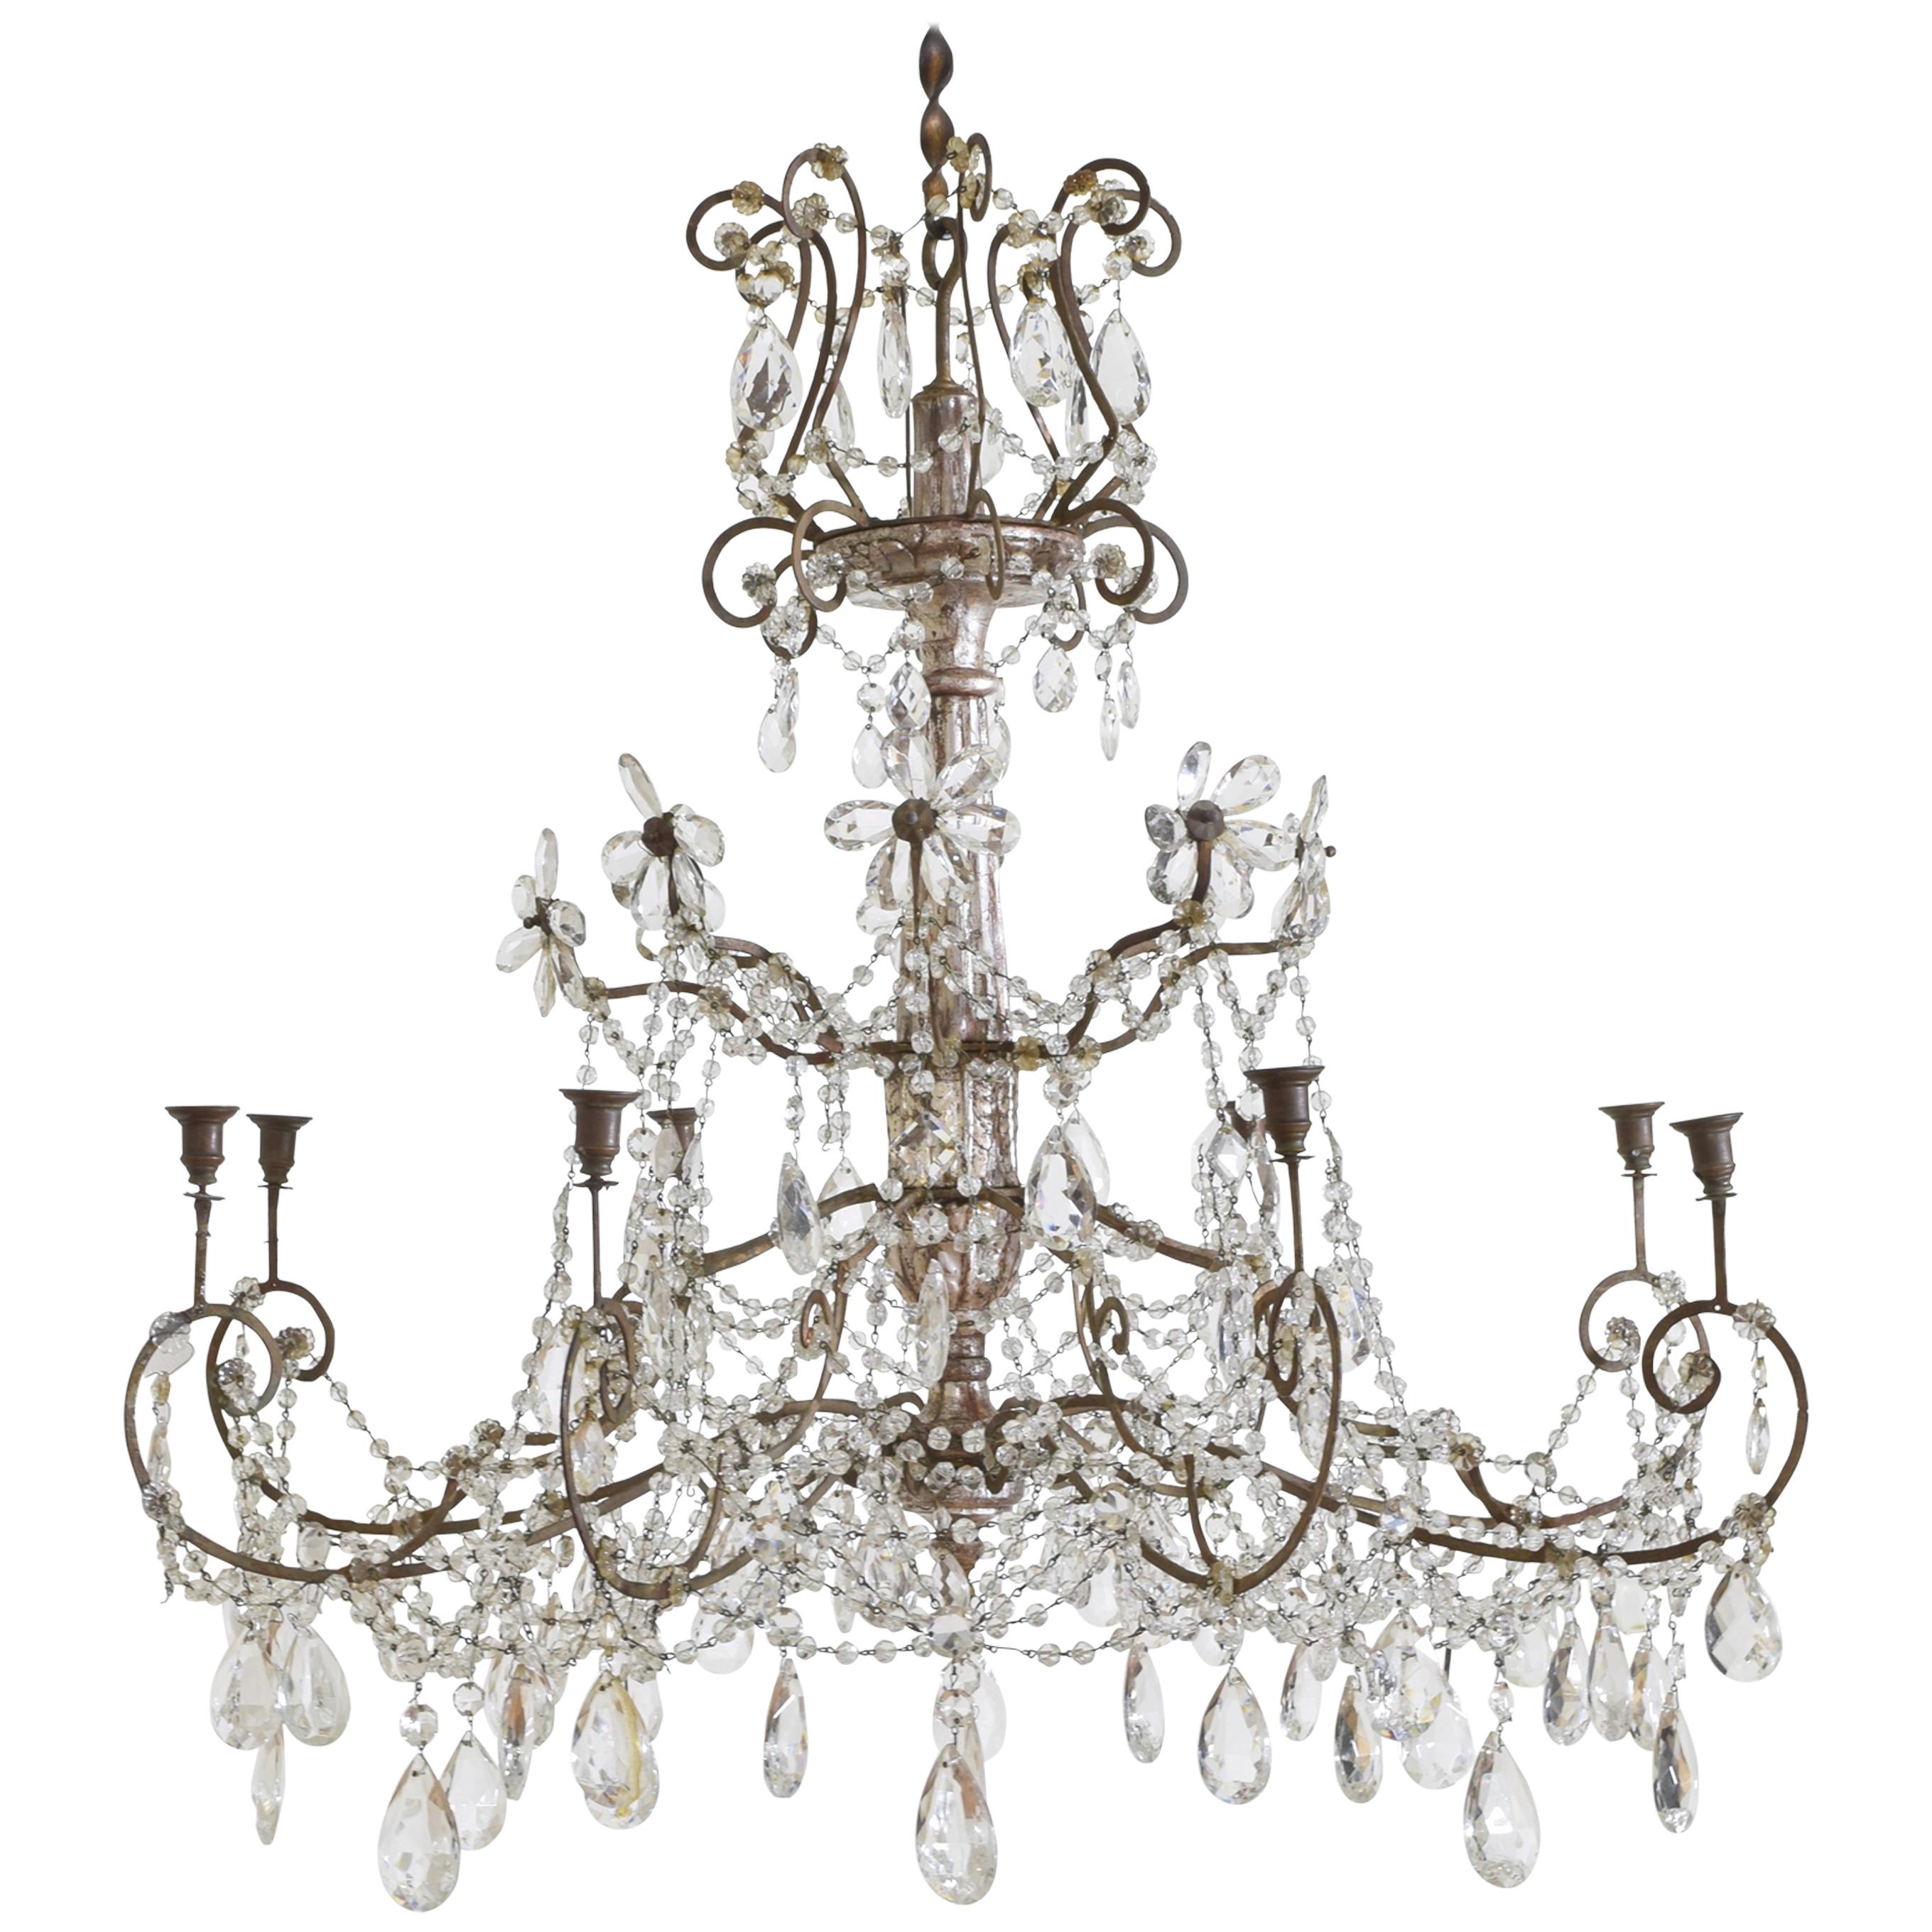 Italian Neoclassic Silver Gilt, Iron, and Glass 8-Light Chandelier